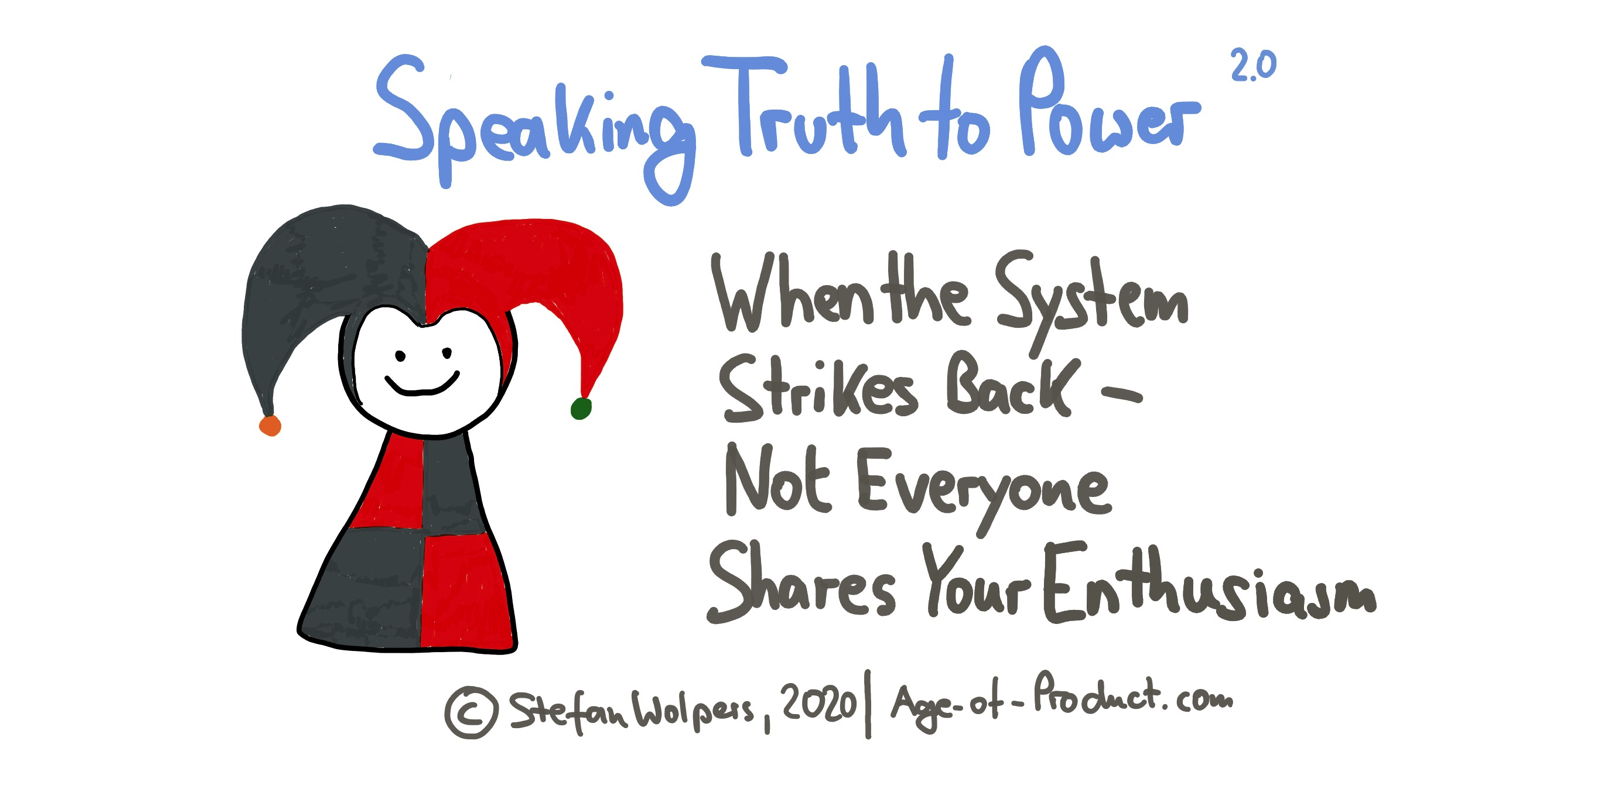 Speaking Truth to Power — Taking A Stand as an Agile Practitioner When the System Strikes Back — Berlin Product People GmbH